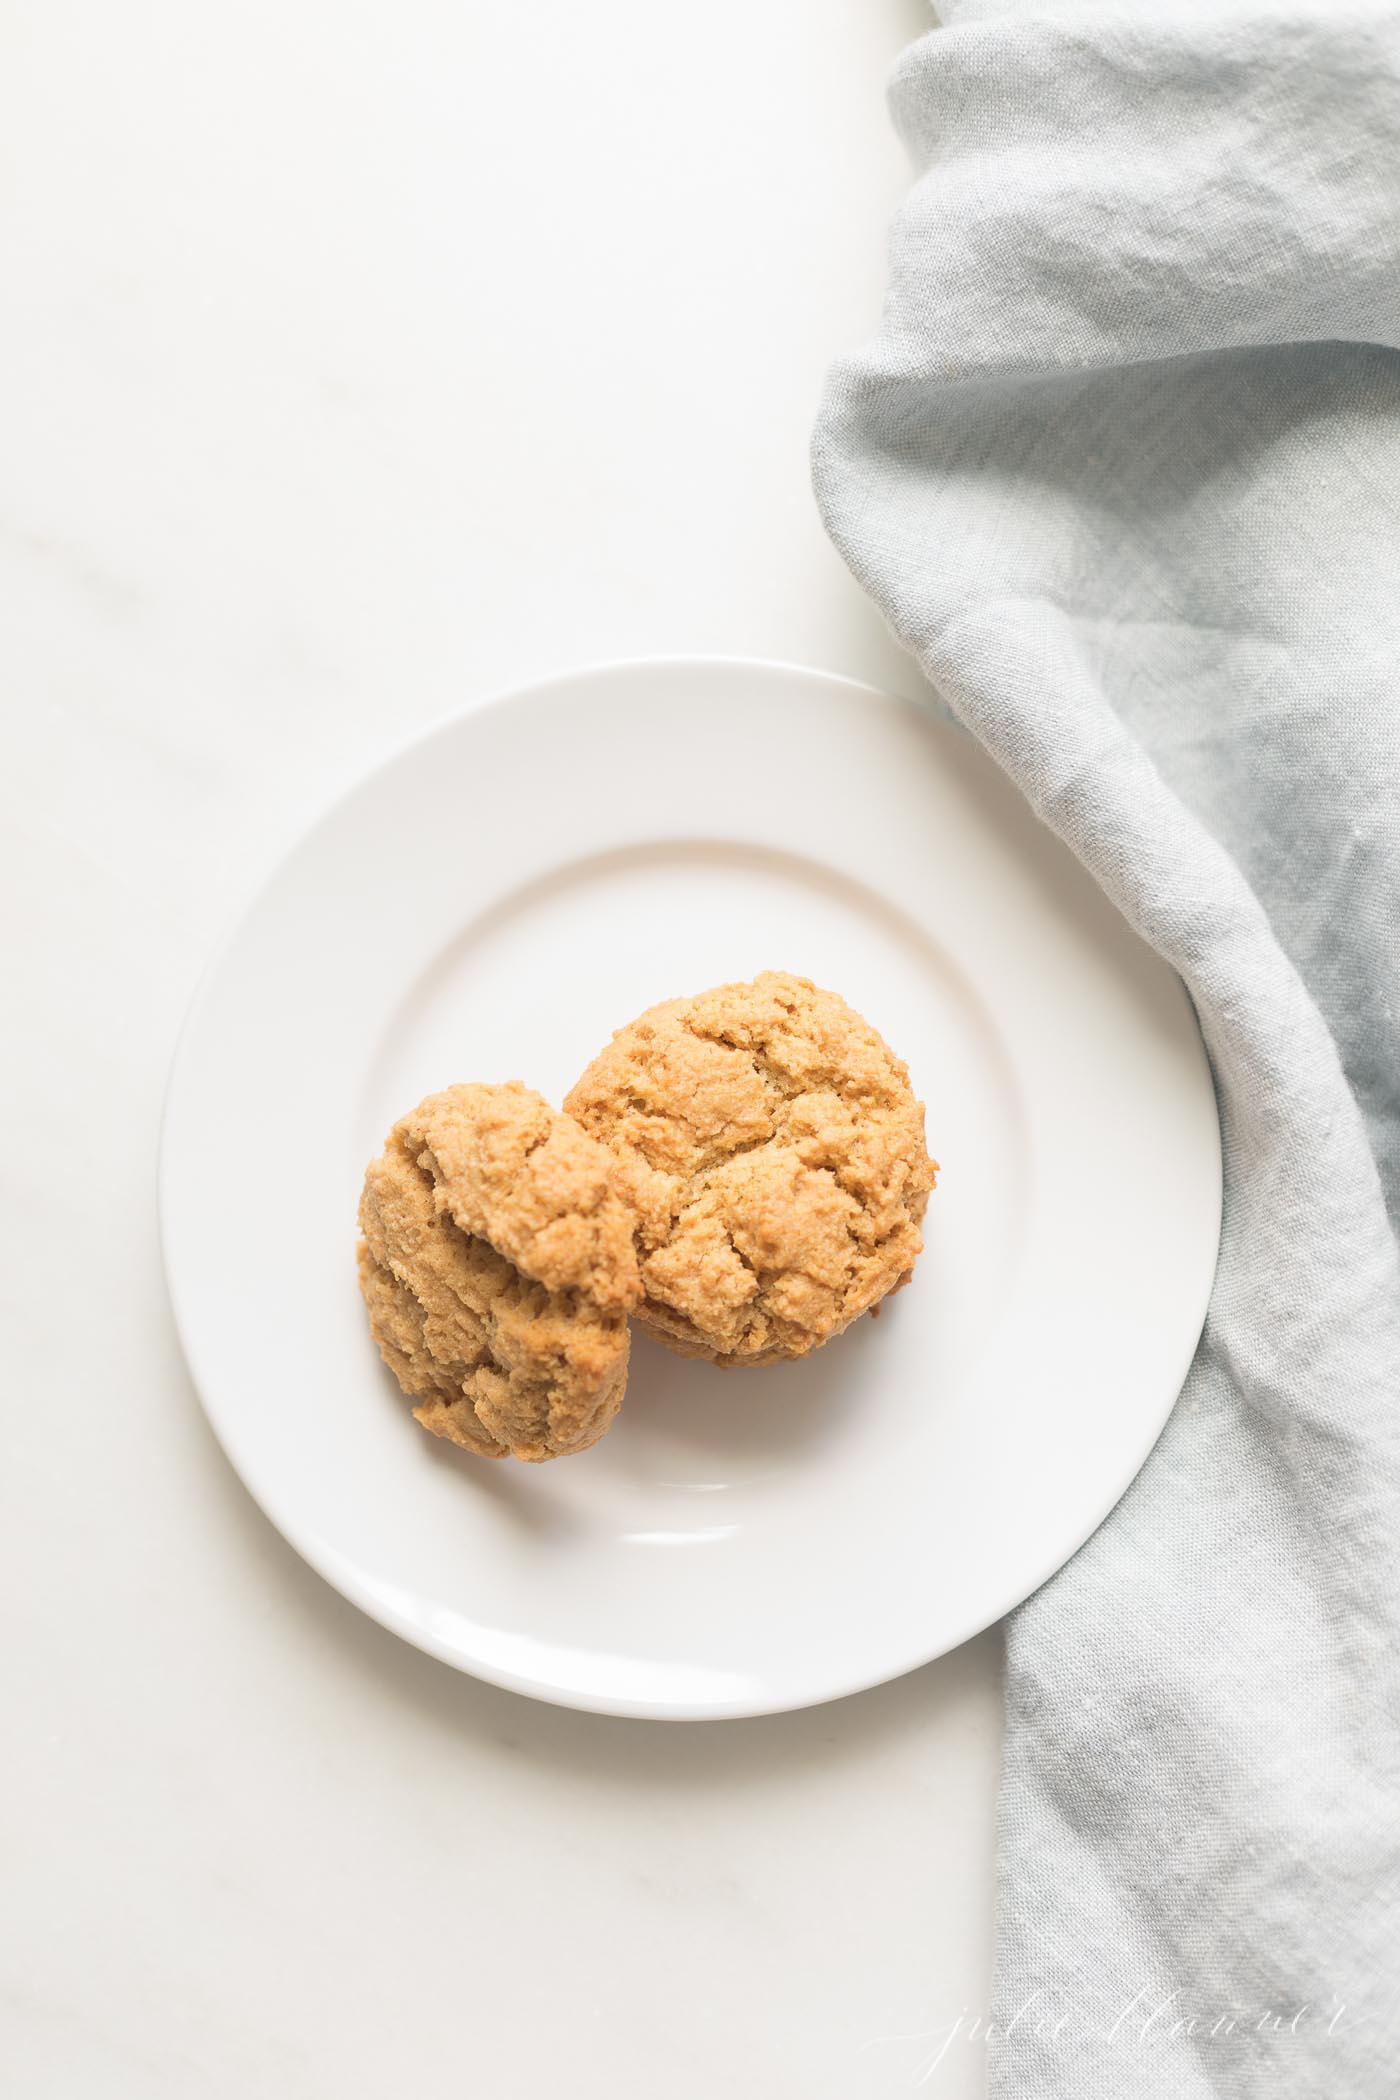 A white plate with low calorie peanut butter cookies, linen kitchen towel to the side.